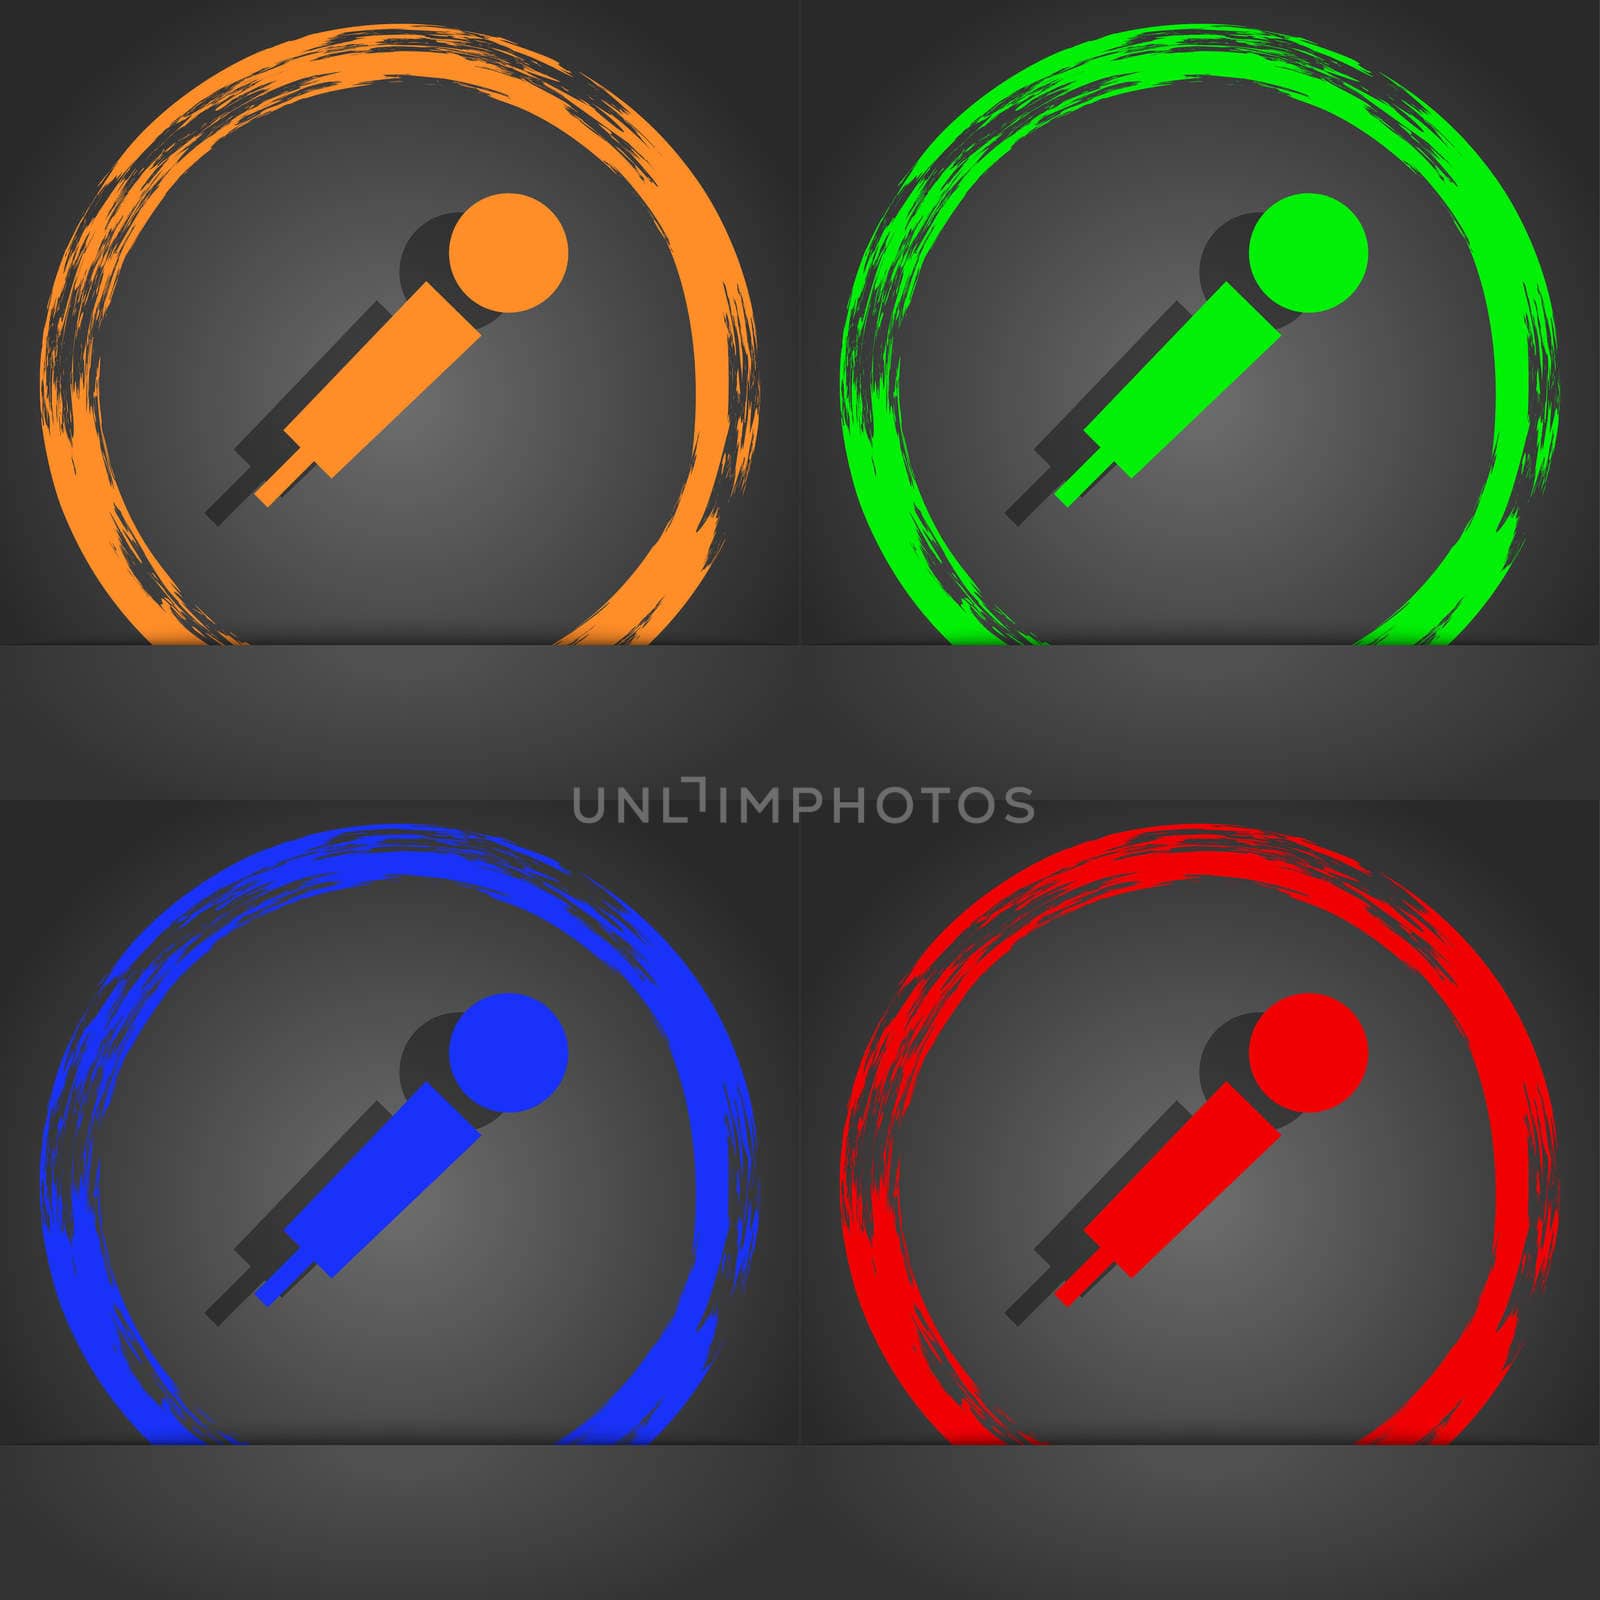 microphone icon symbol. Fashionable modern style. In the orange, green, blue, green design. illustration